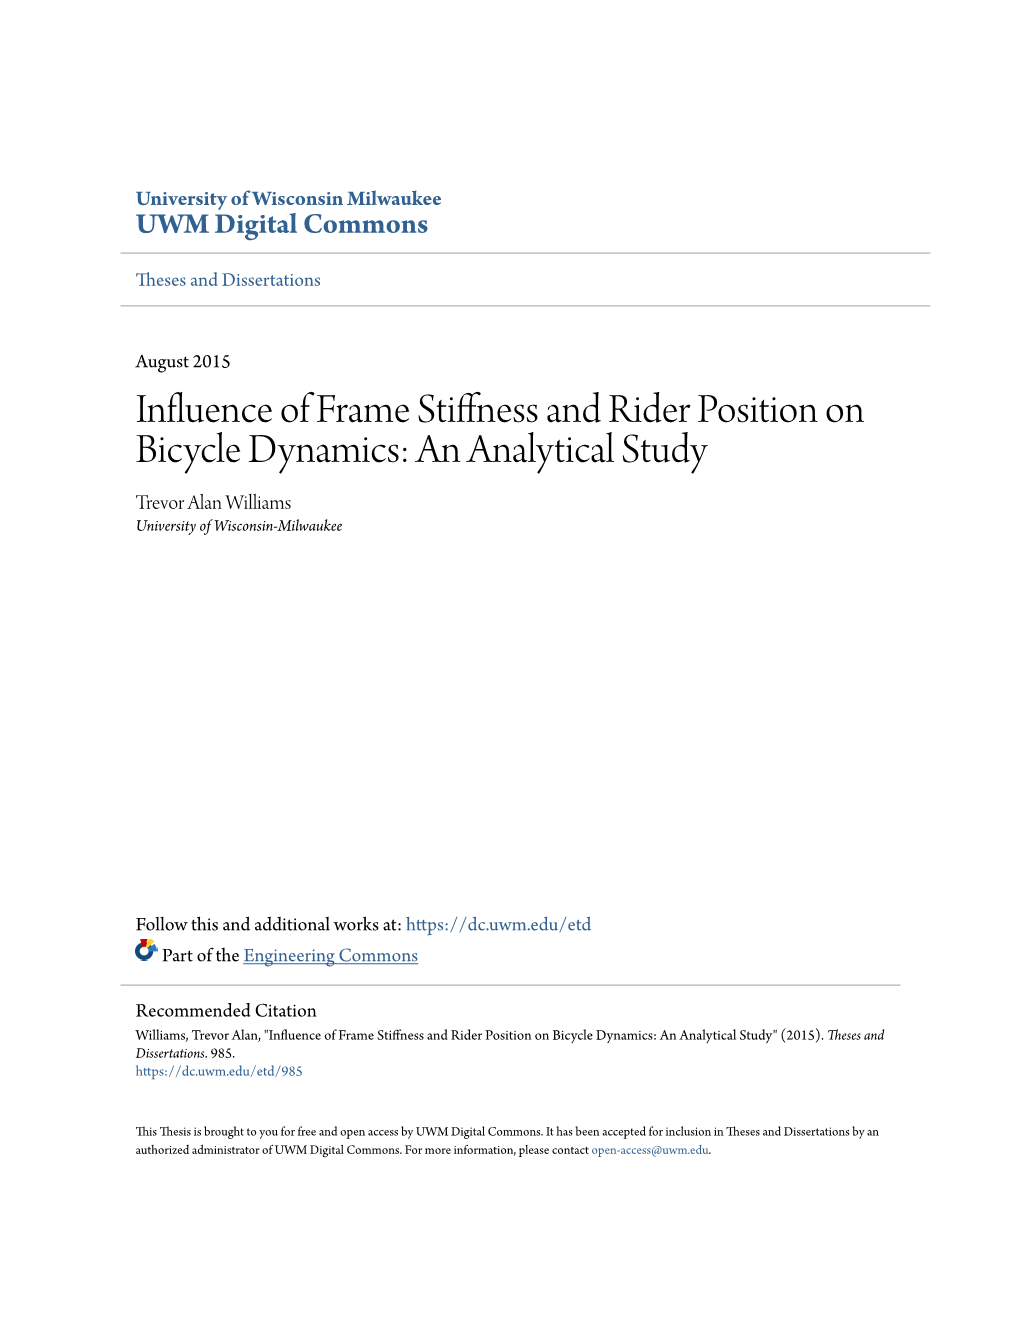 Influence of Frame Stiffness and Rider Position on Bicycle Dynamics: an Analytical Study Trevor Alan Williams University of Wisconsin-Milwaukee